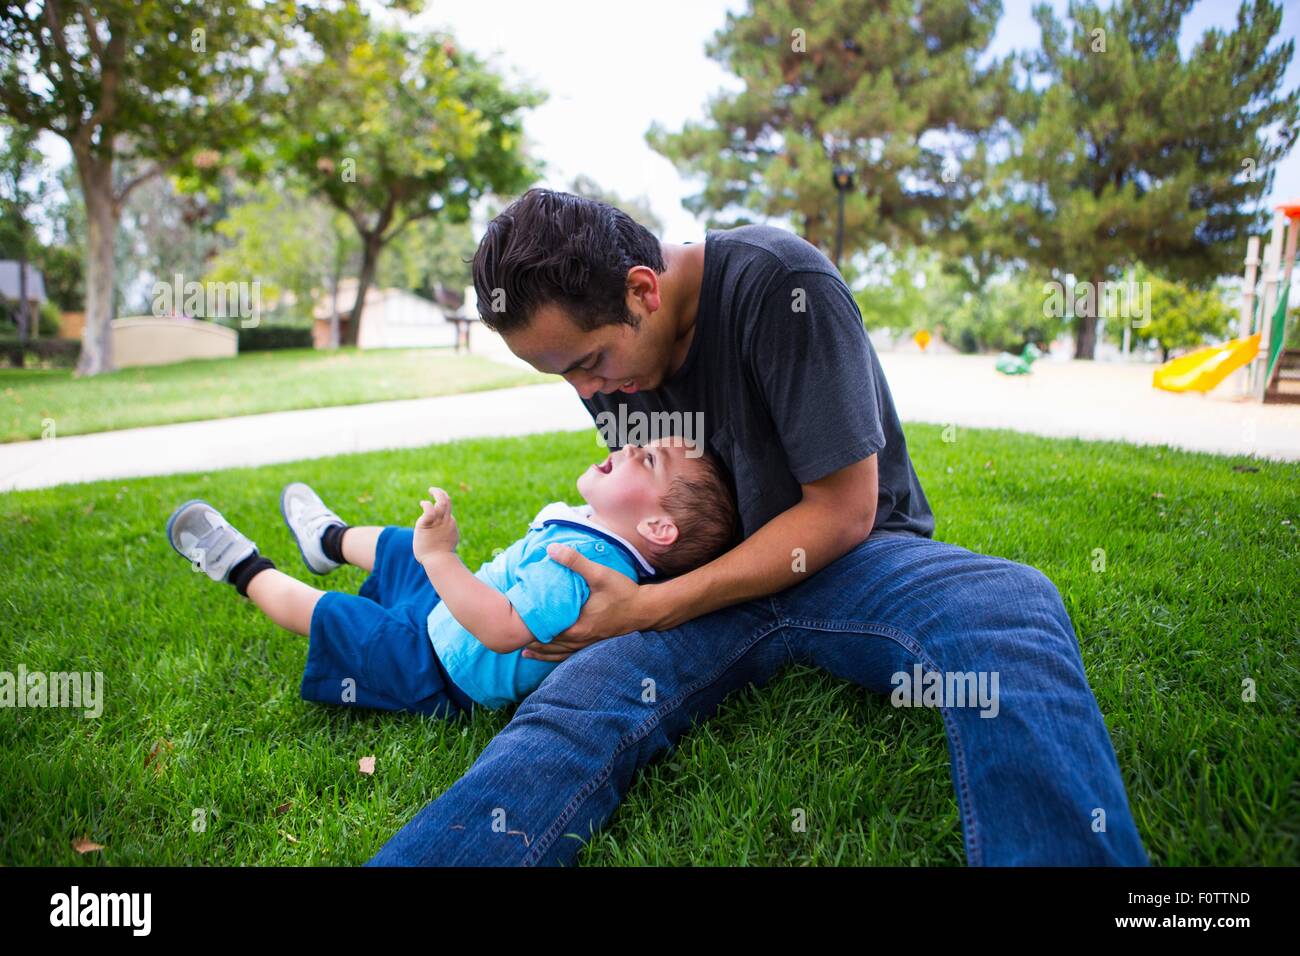 Male toddler playing with older adult brother in park Stock Photo